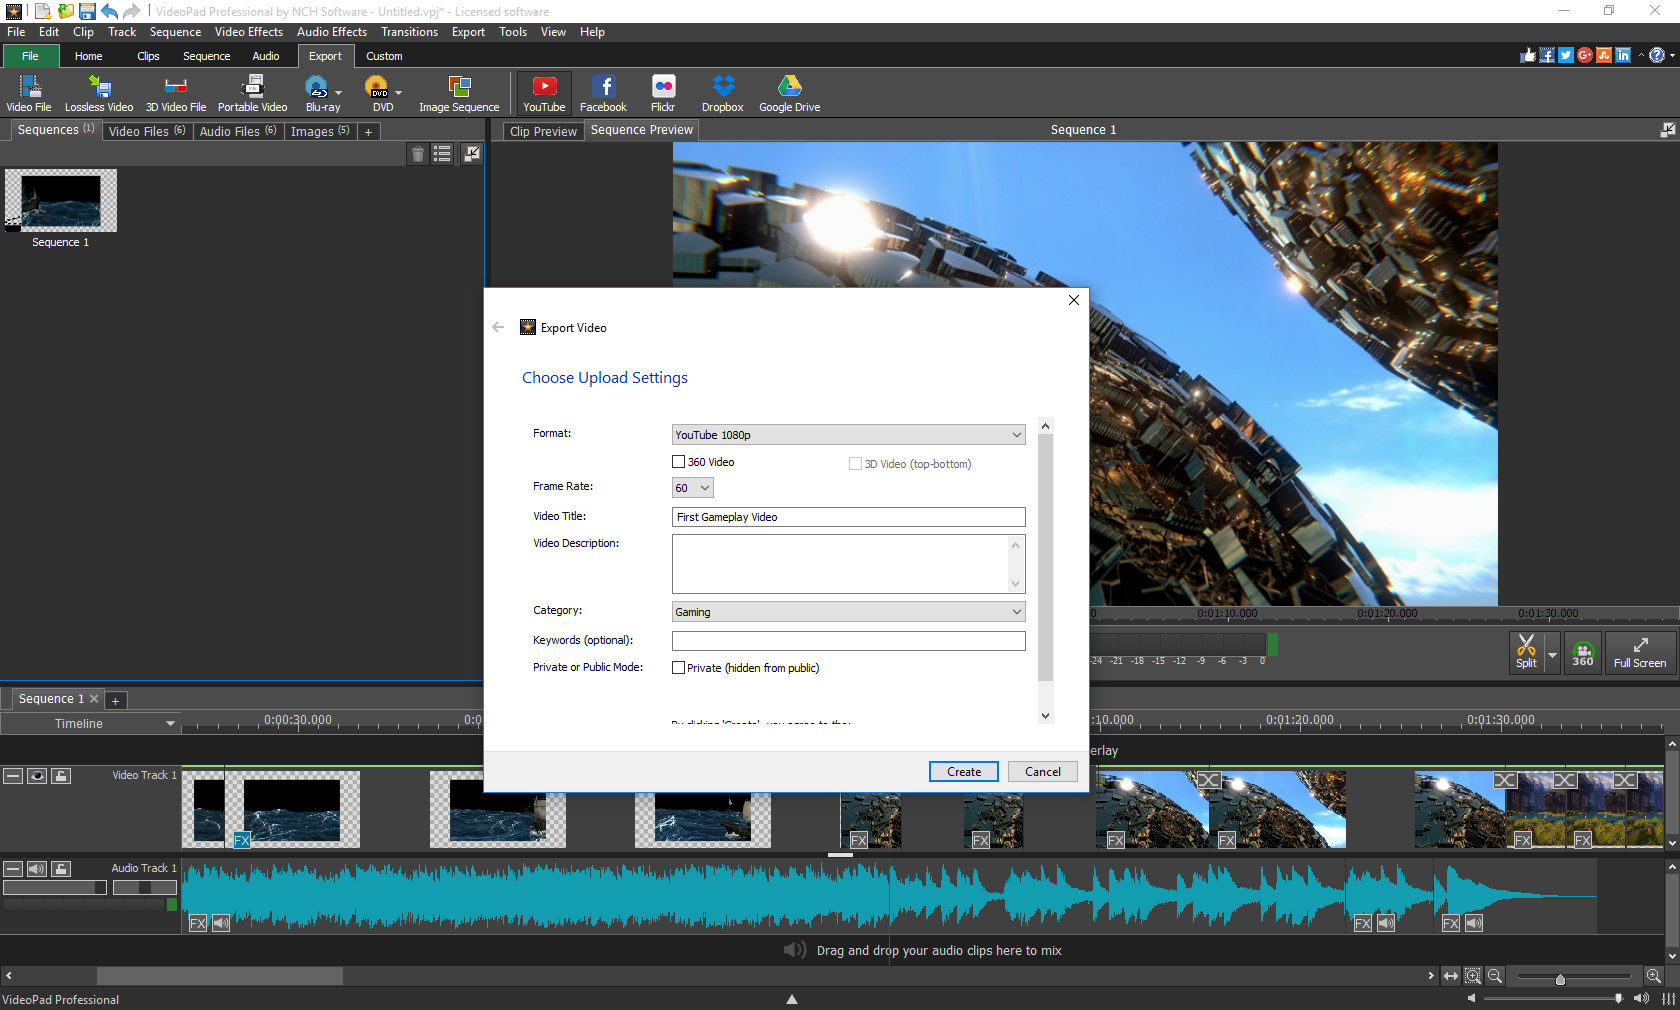 nch videopad video editor professional 6.0